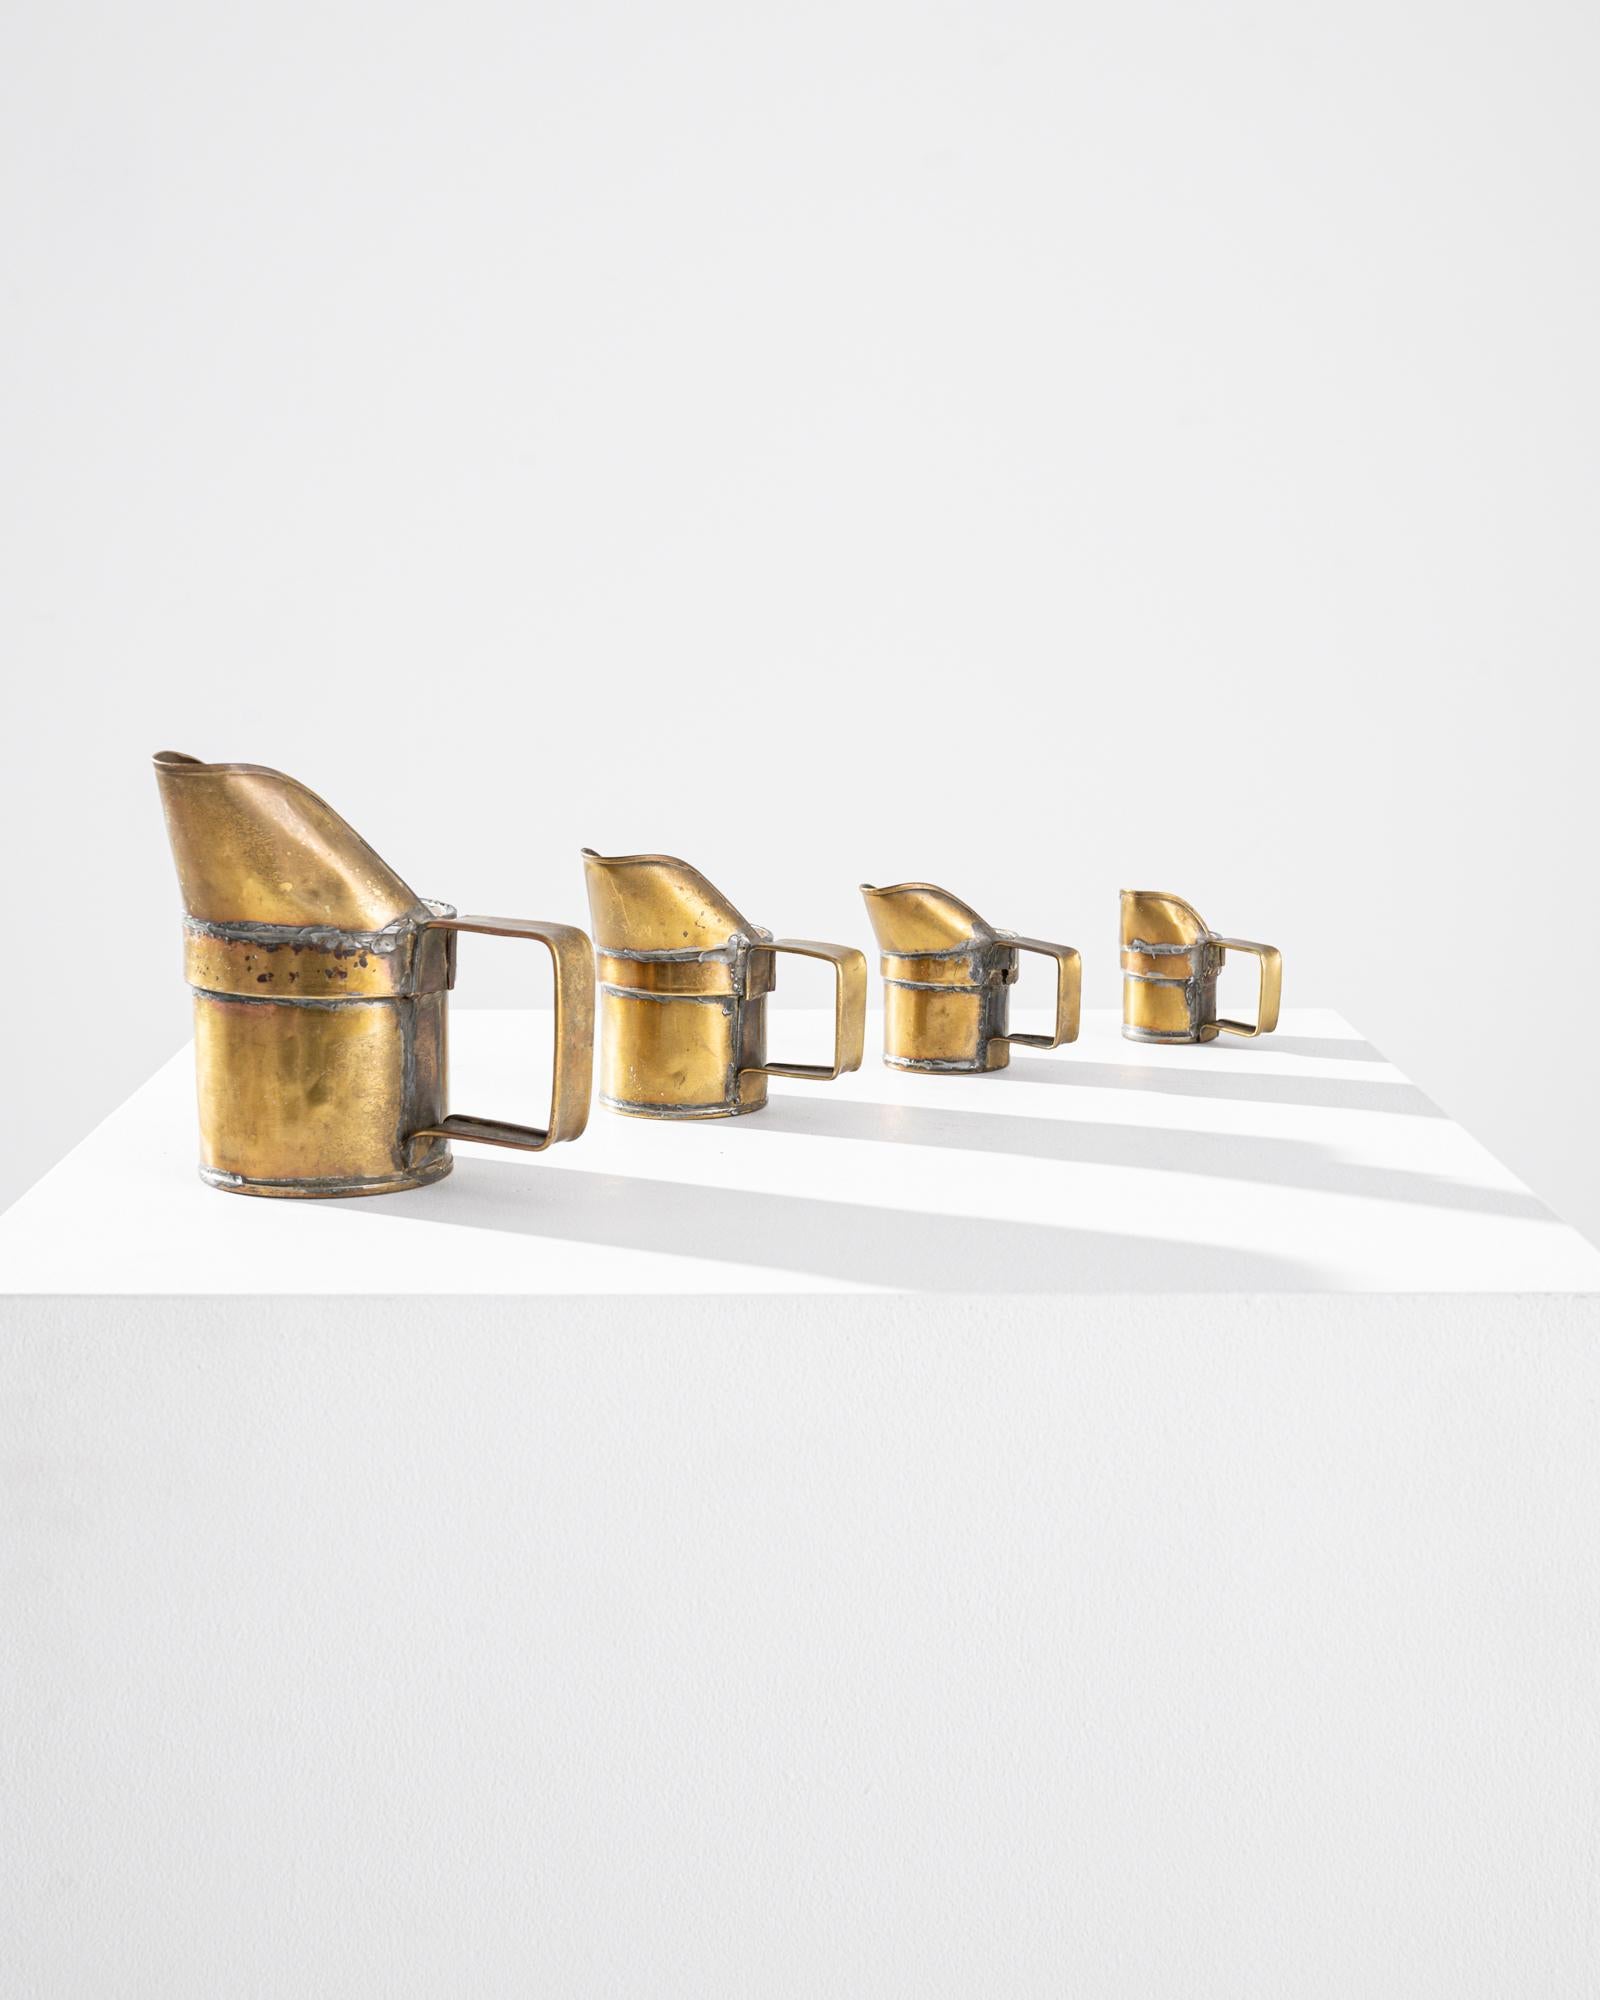 A set of four 20th century copper measurers crafted in France, these antique decorative cups feature an elegant asymmetric folded spout and a striking rectangular handle. Slightly oxidized, the lush finish of the copper exhibits a deep gilded tone